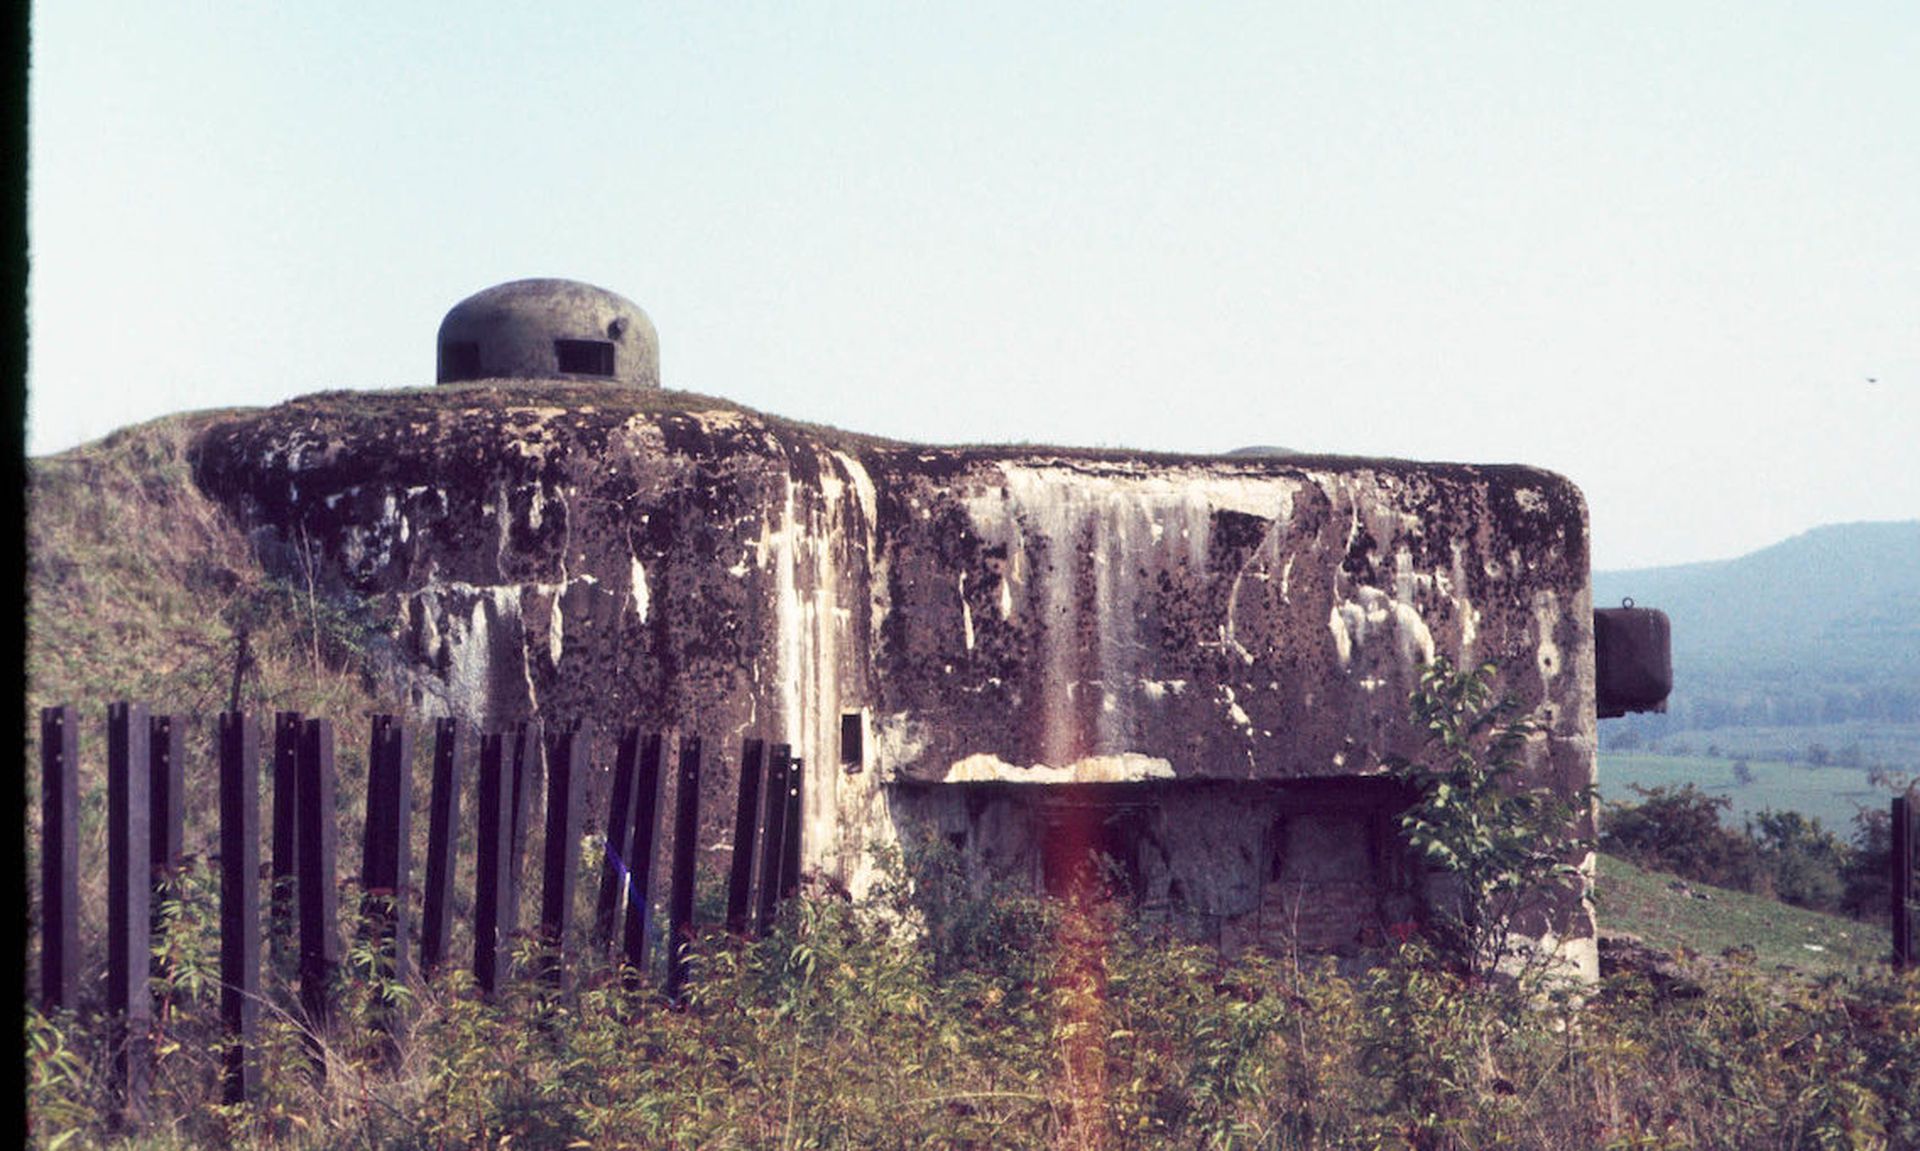 Today’s columnist, Reuben Braham of Cyberint, argues that building a Maginot Line the way the French did during World War II also won’t work in today’s security landscape. A wall alone won’t secure a company, they need a combination of digital risk protection and attack surface management.  (Credit: mcdolan79; https://creativecommons.org/licenses/b...